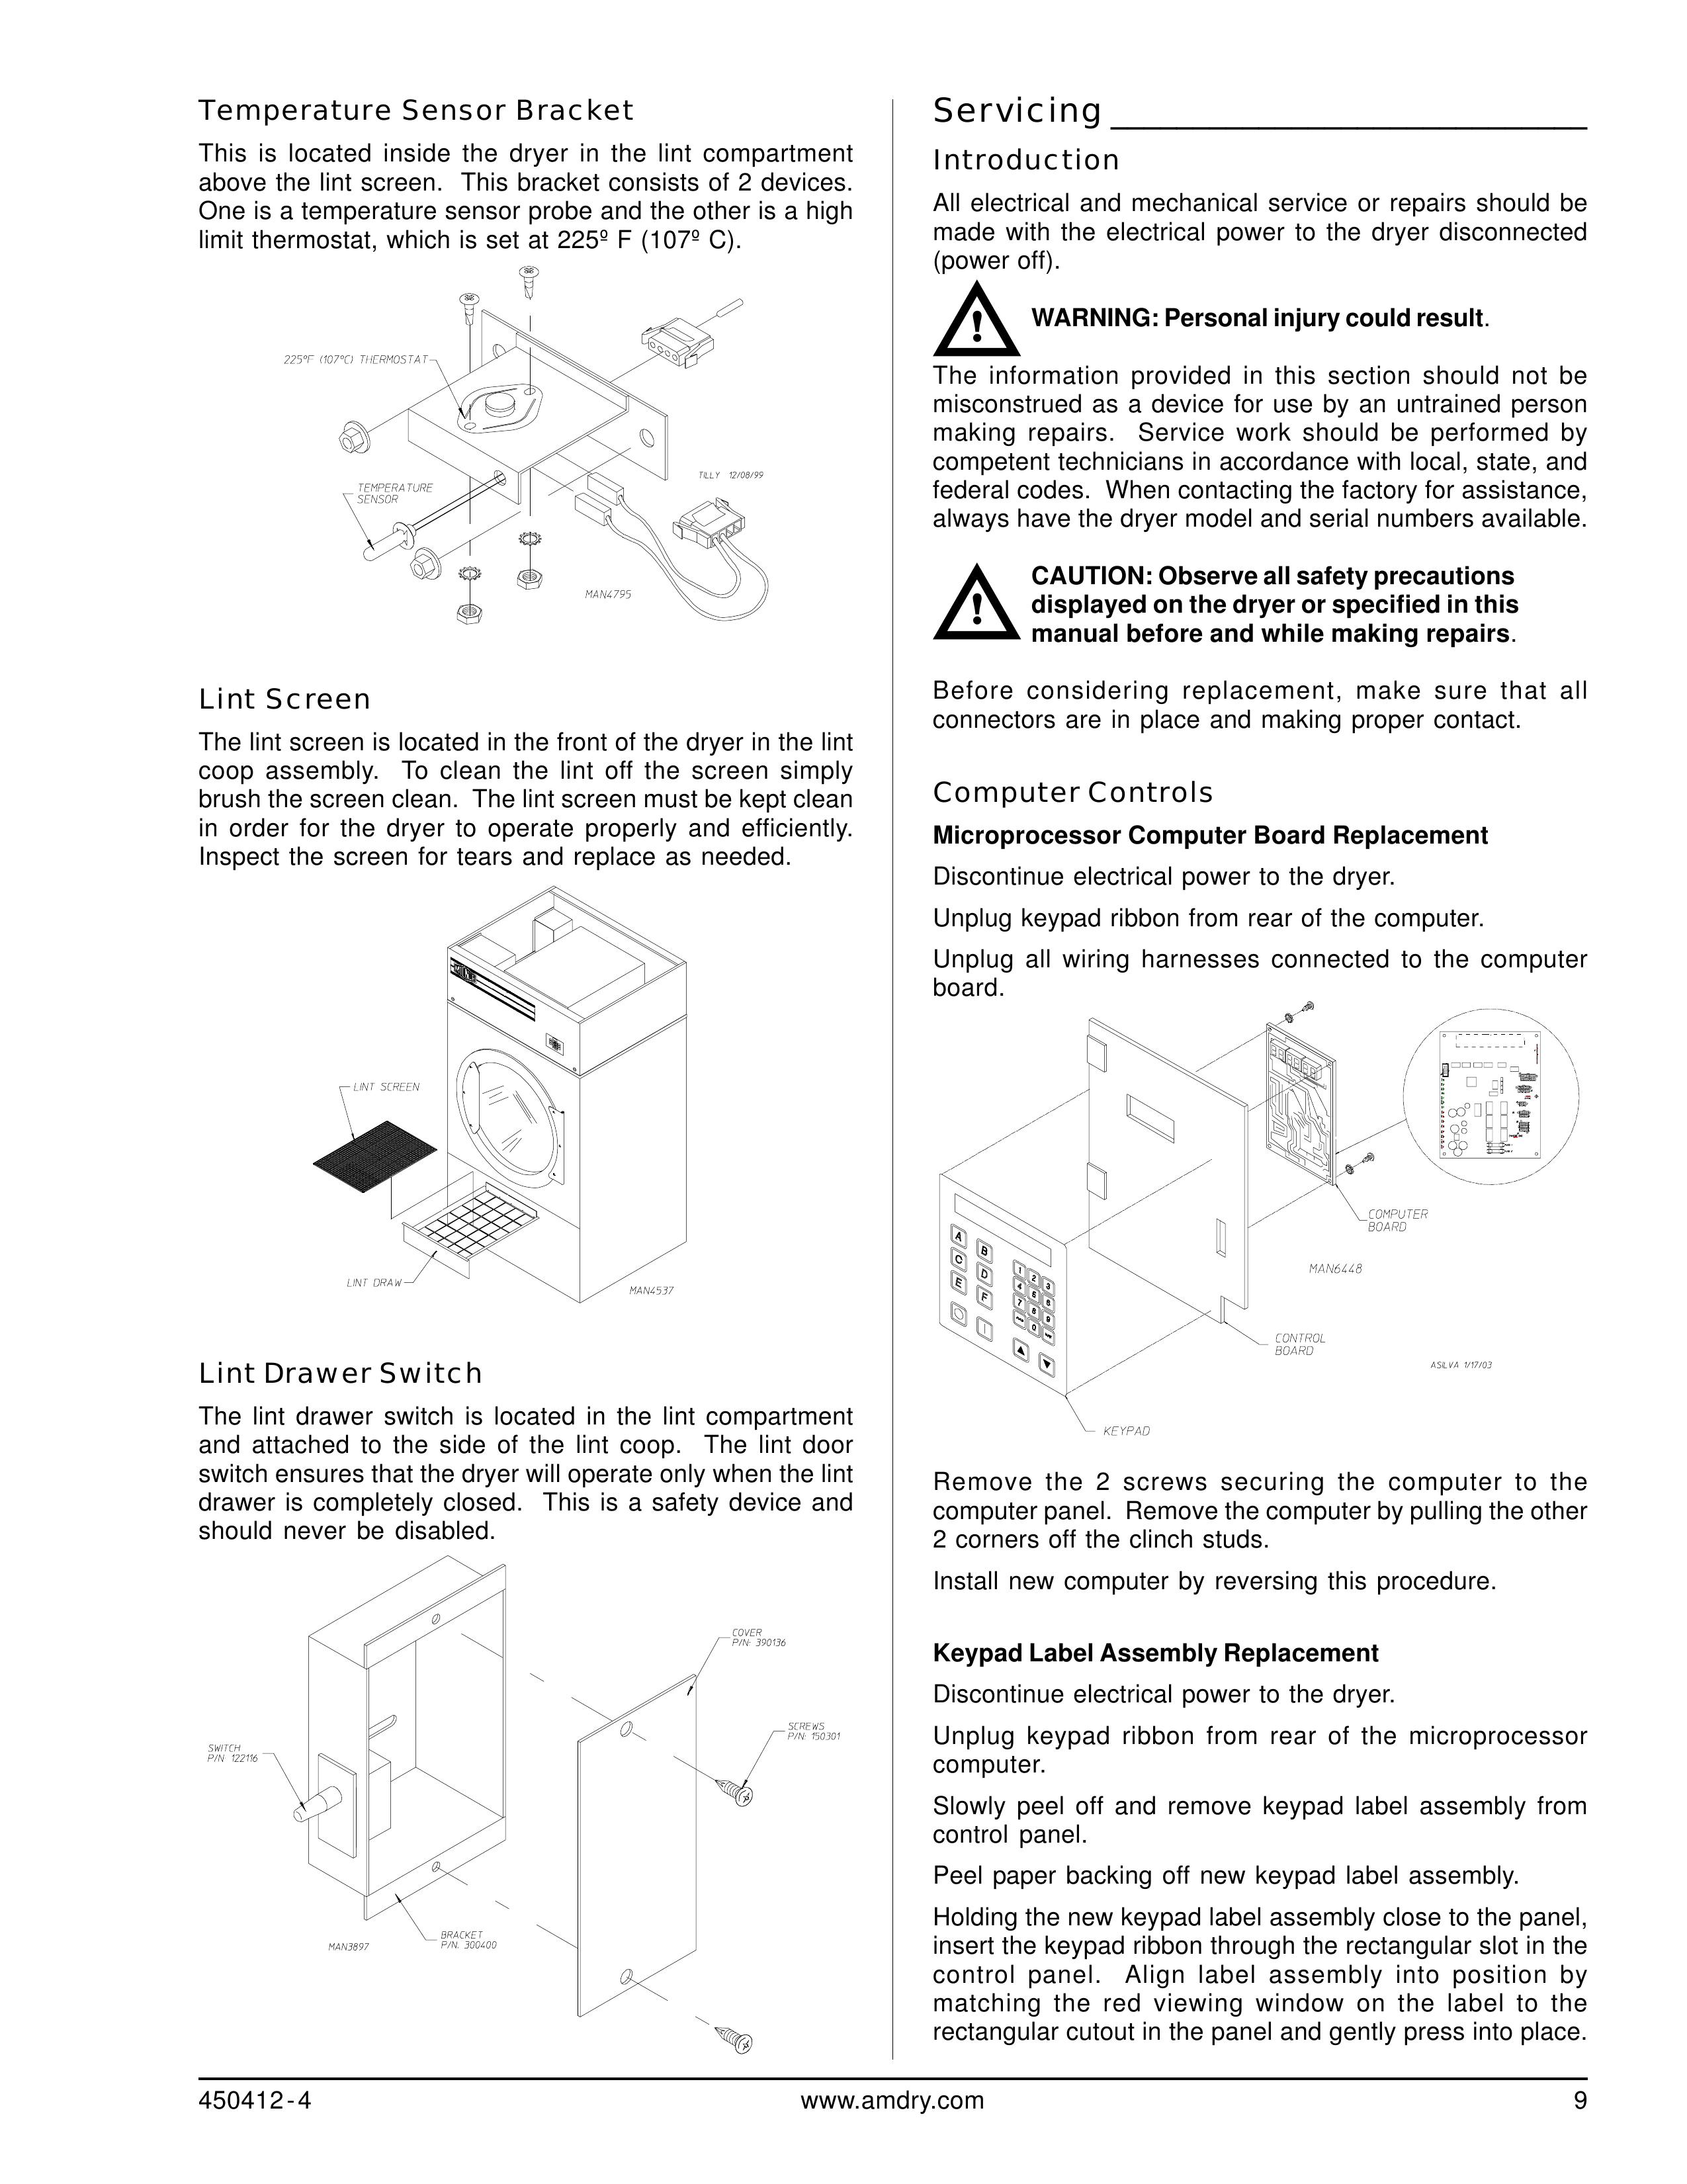 ADC ML-122 Clothes Dryer User Manual (Page 9)